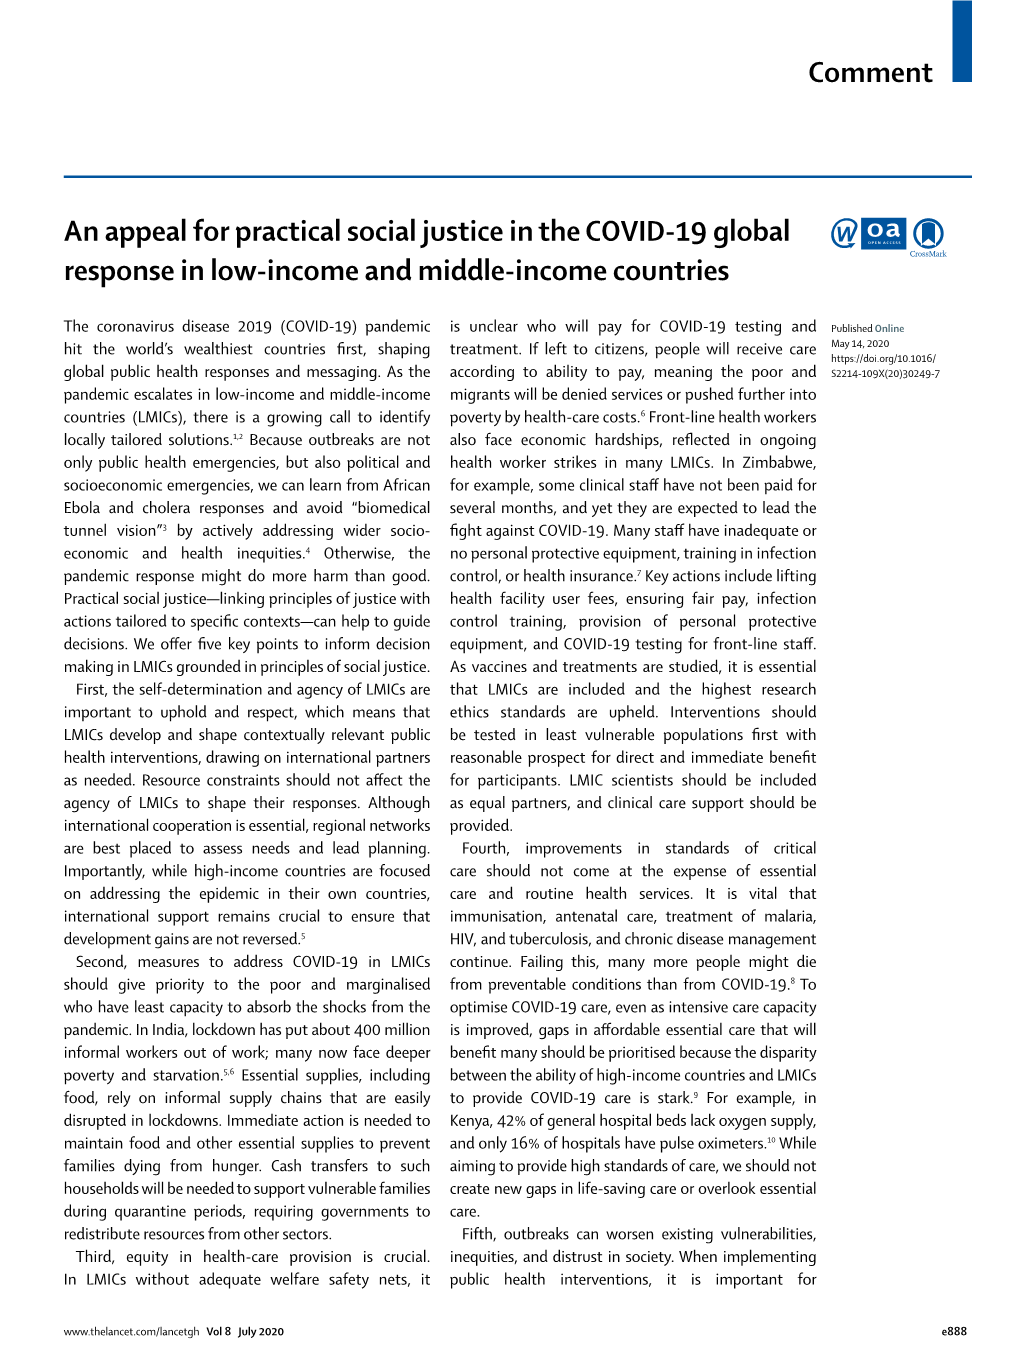 An Appeal for Practical Social Justice in the COVID-19 Global Response in Low-Income and Middle-Income Countries